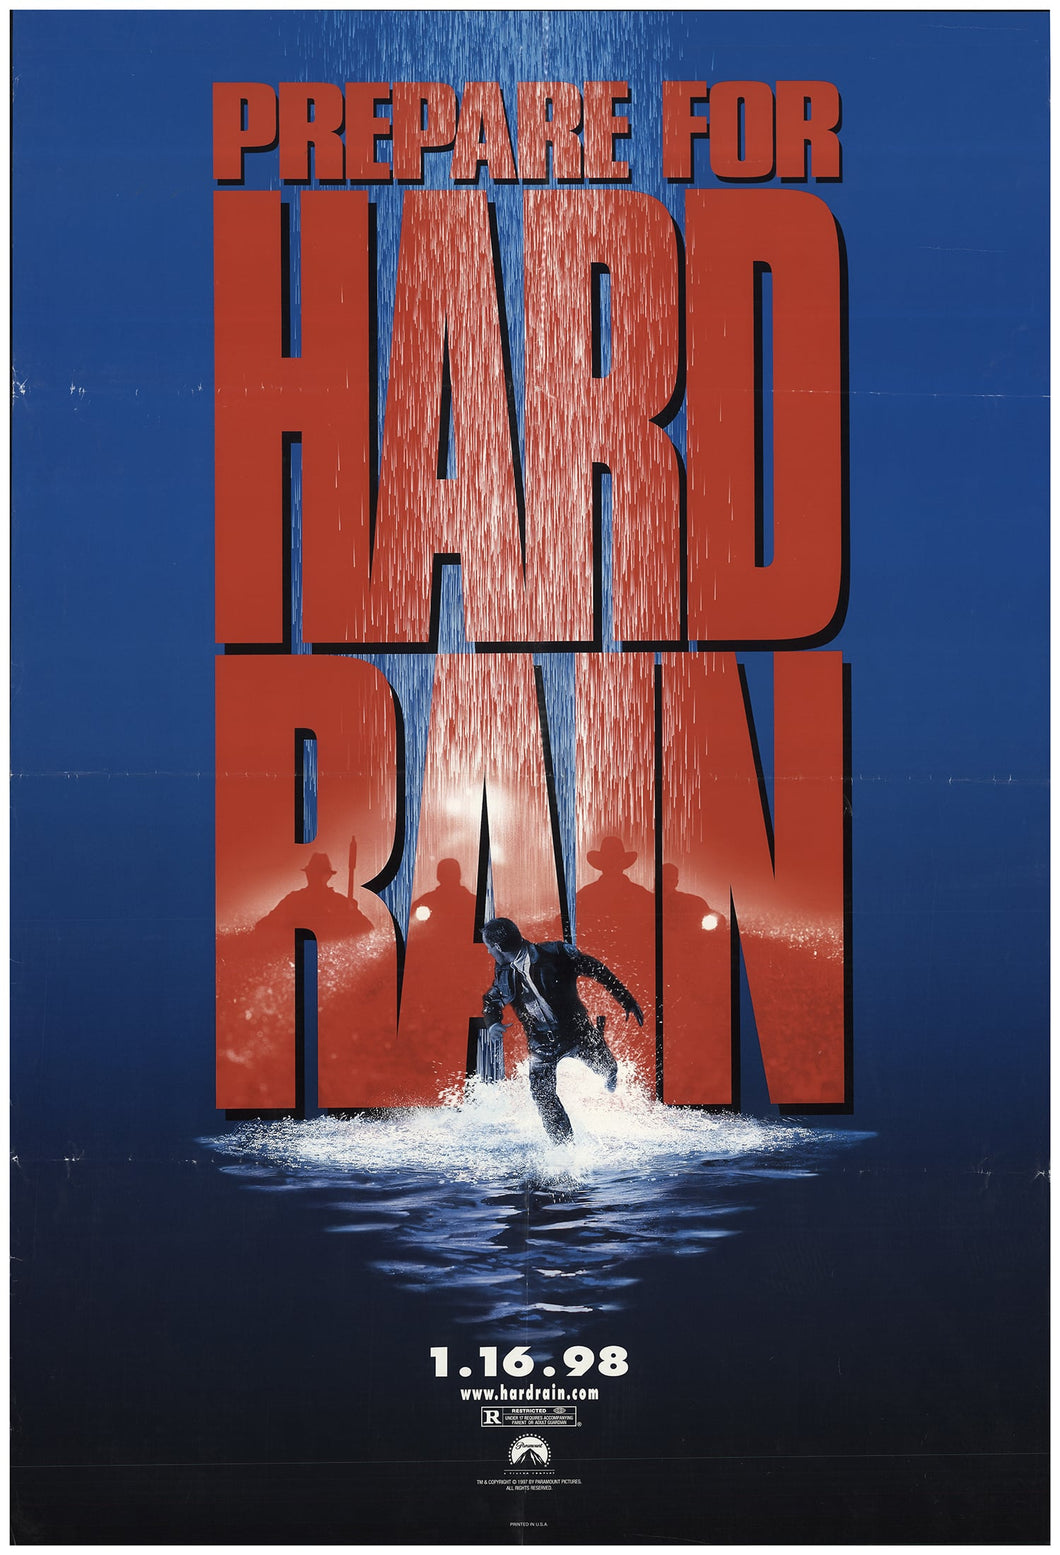 Hard Rain (1998) Movie Poster High Quality Glossy Paper A1 A2 A3 A4 A3 Framed or Unframed!!!